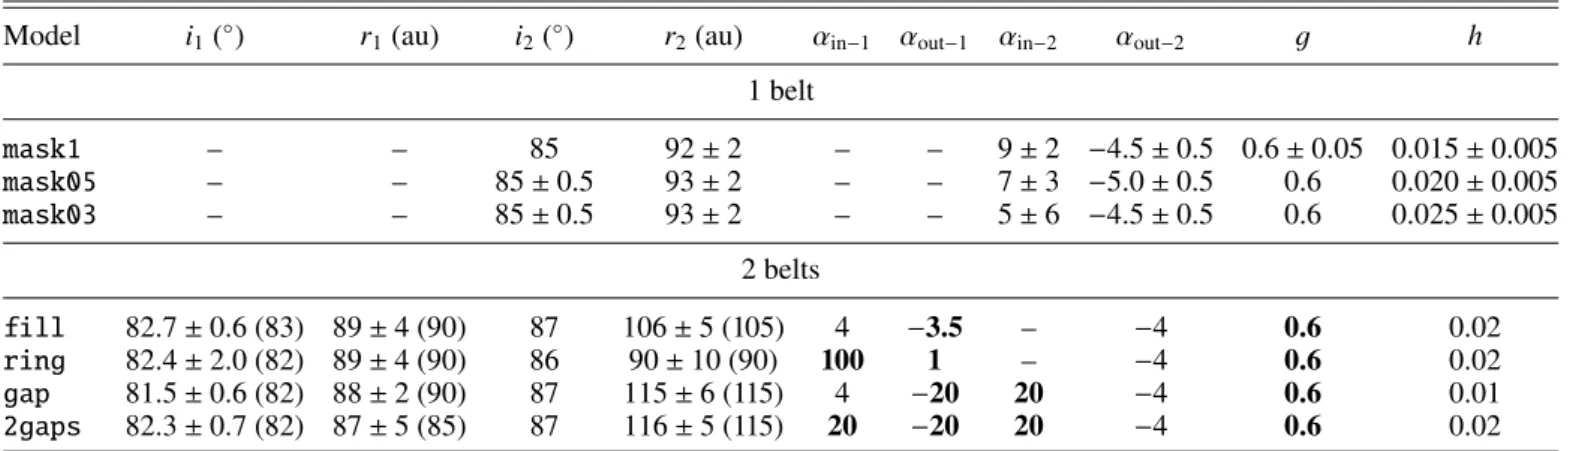 Table 3. Best parameters and dispersion for several one- and two-belt models.